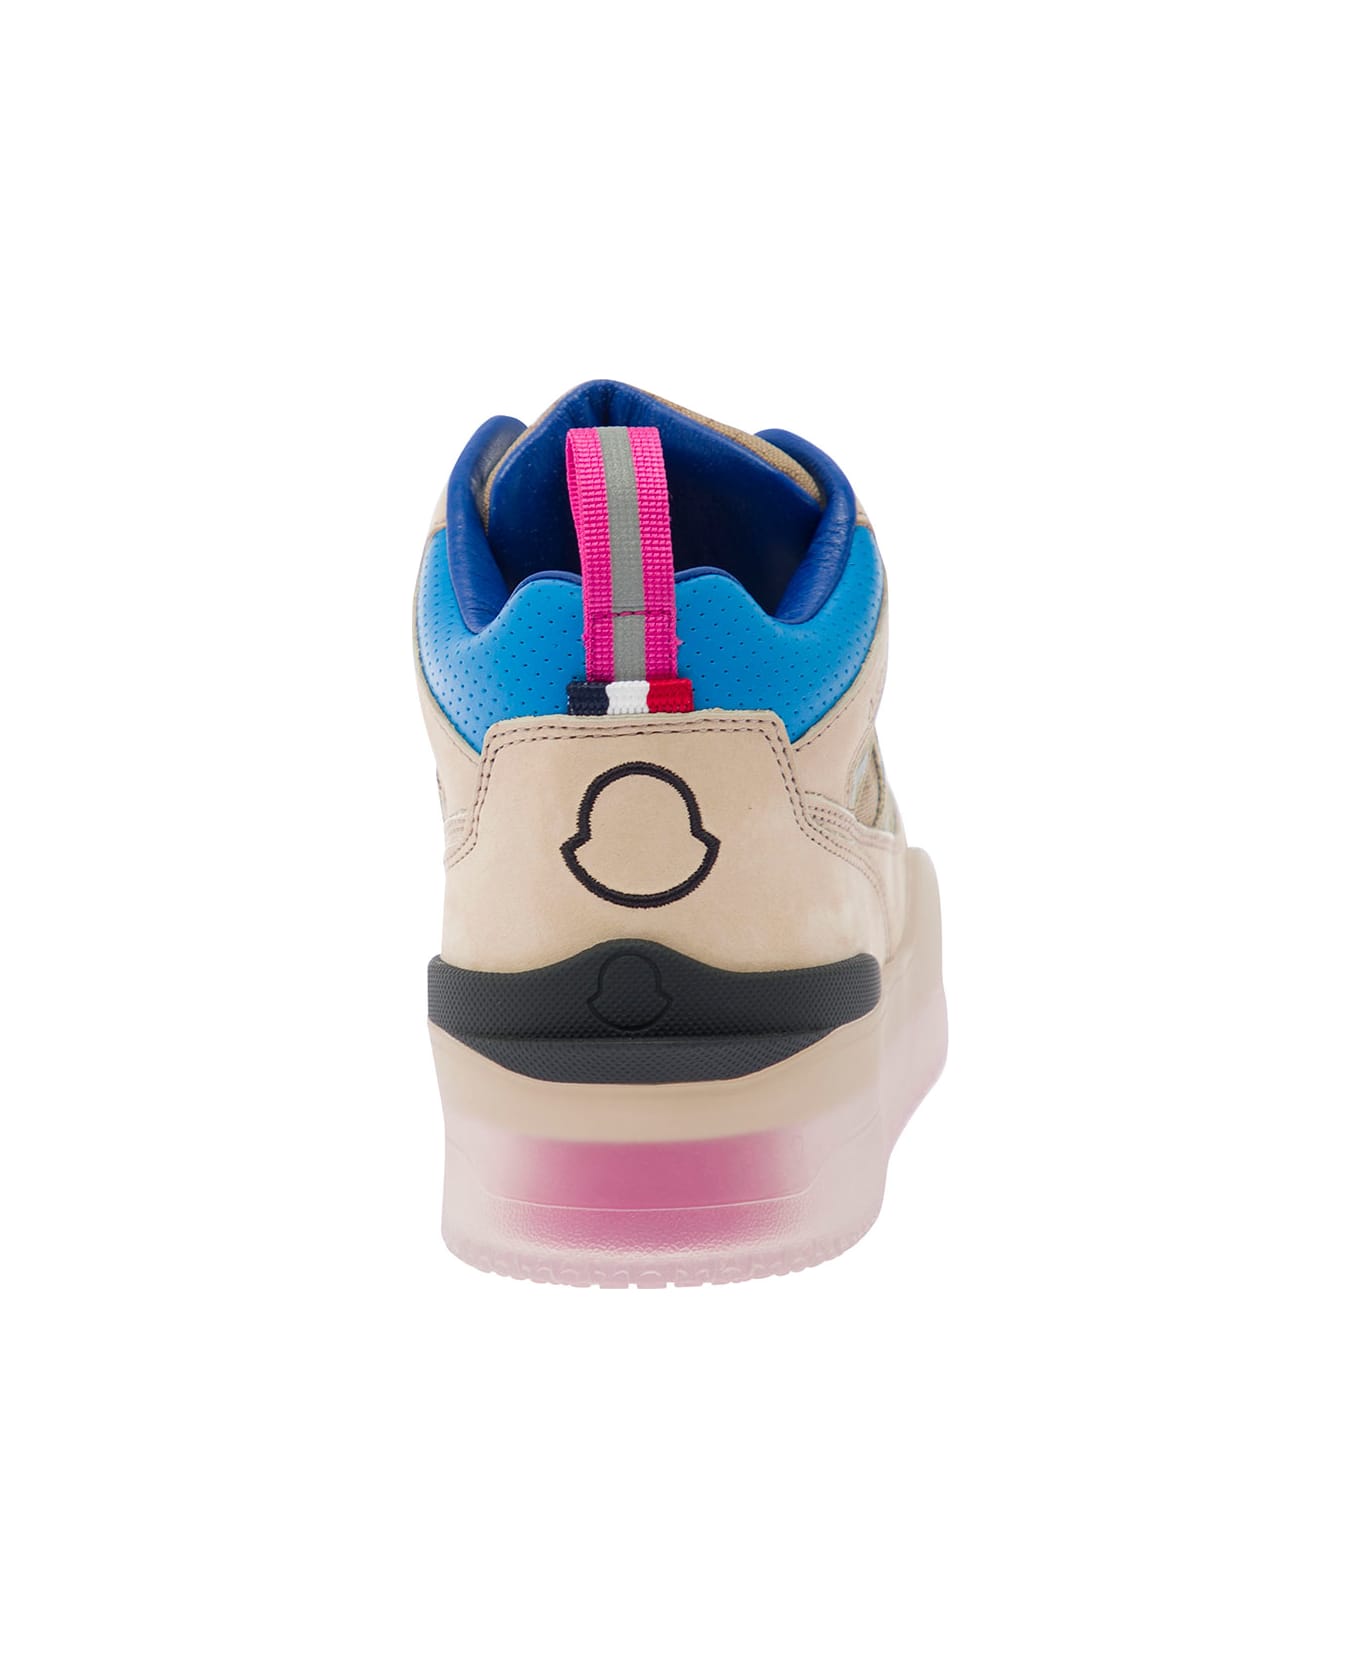 Moncler 'pivot' Multicolor High-top Sneakers With Reflective Straps In Leather Woman - Multicolor